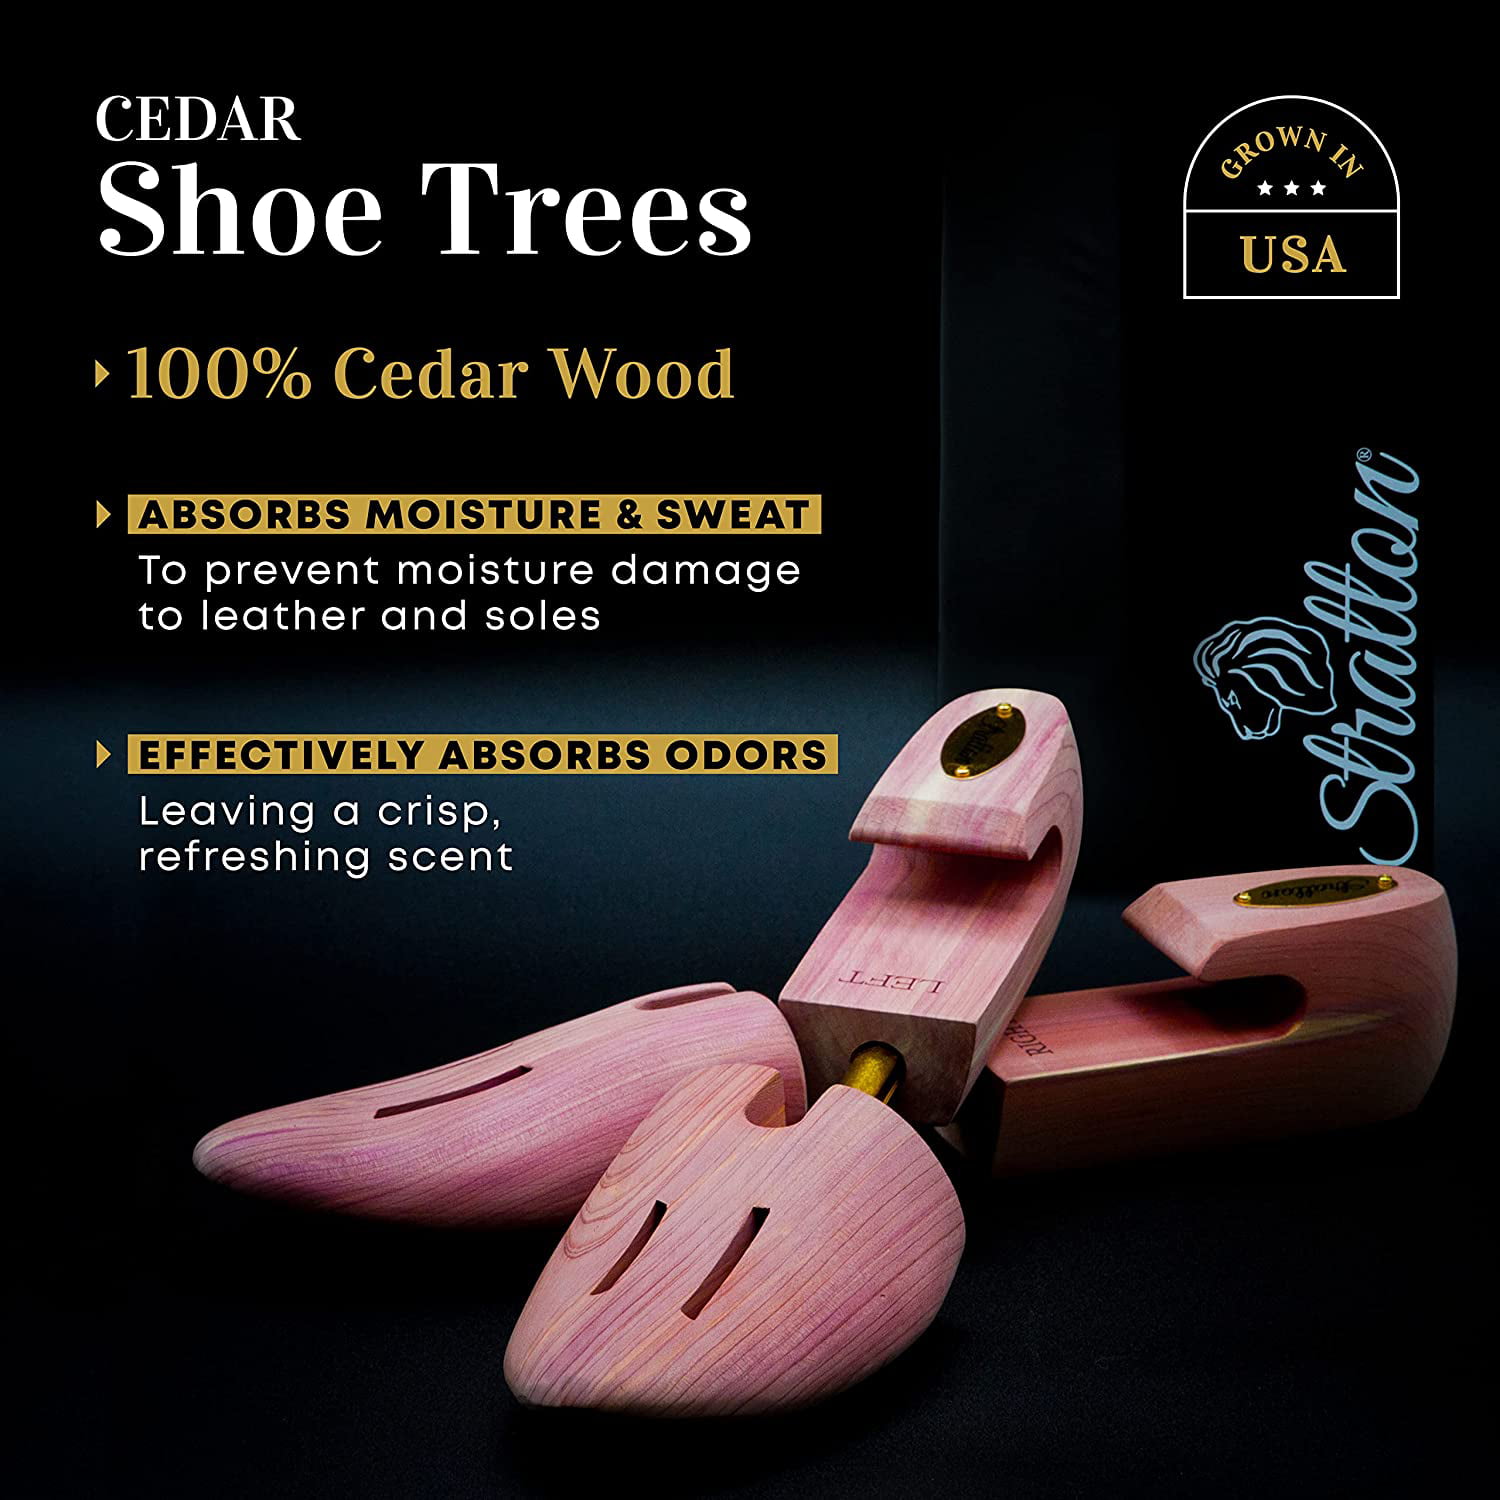 GROWN IN USA STRATTON CEDAR SHOE TREE 2-PACK FOR MEN for 2 pairs of shoes 